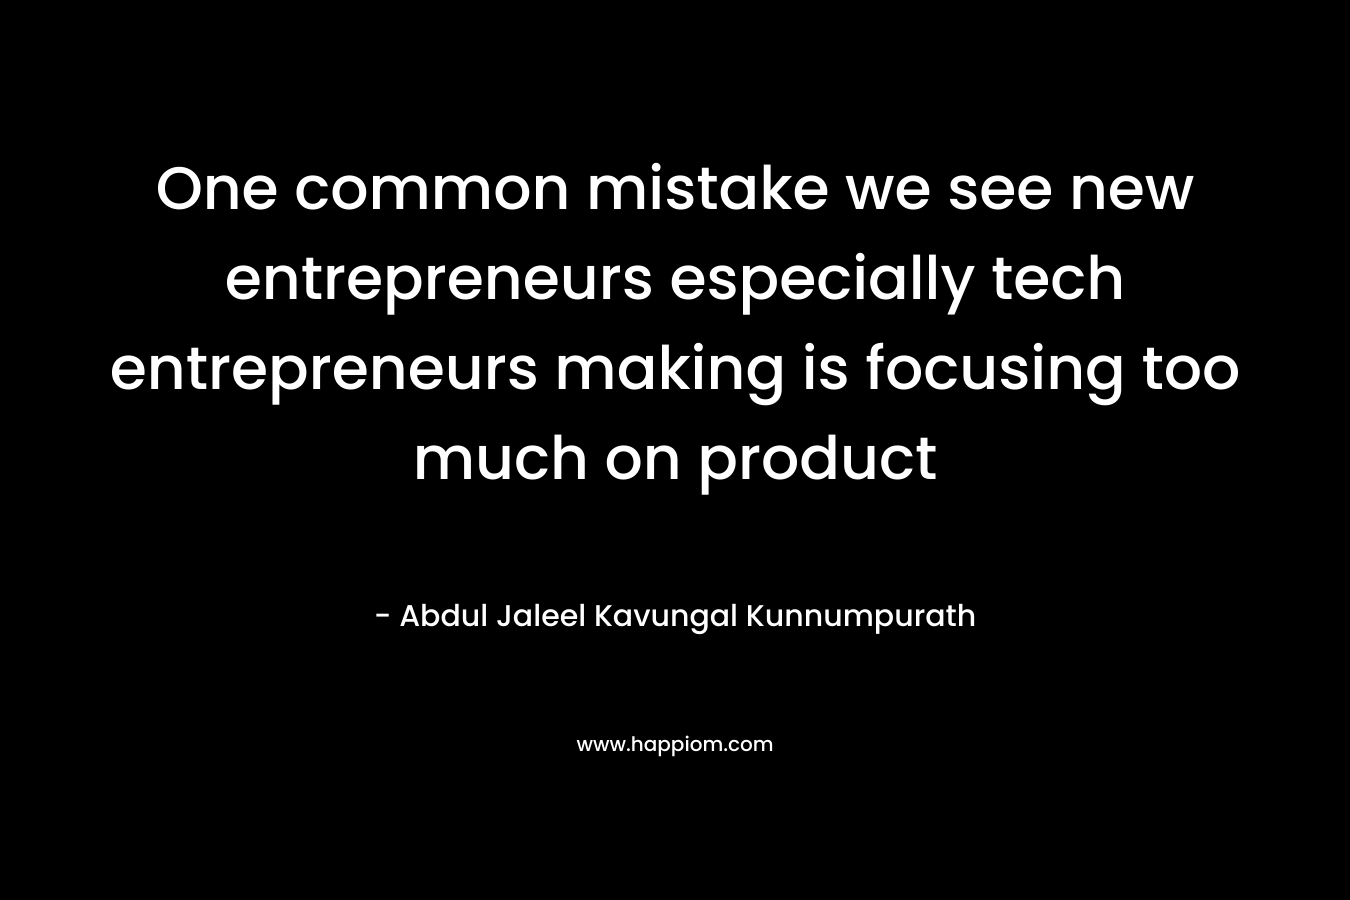 One common mistake we see new entrepreneurs especially tech entrepreneurs making is focusing too much on product